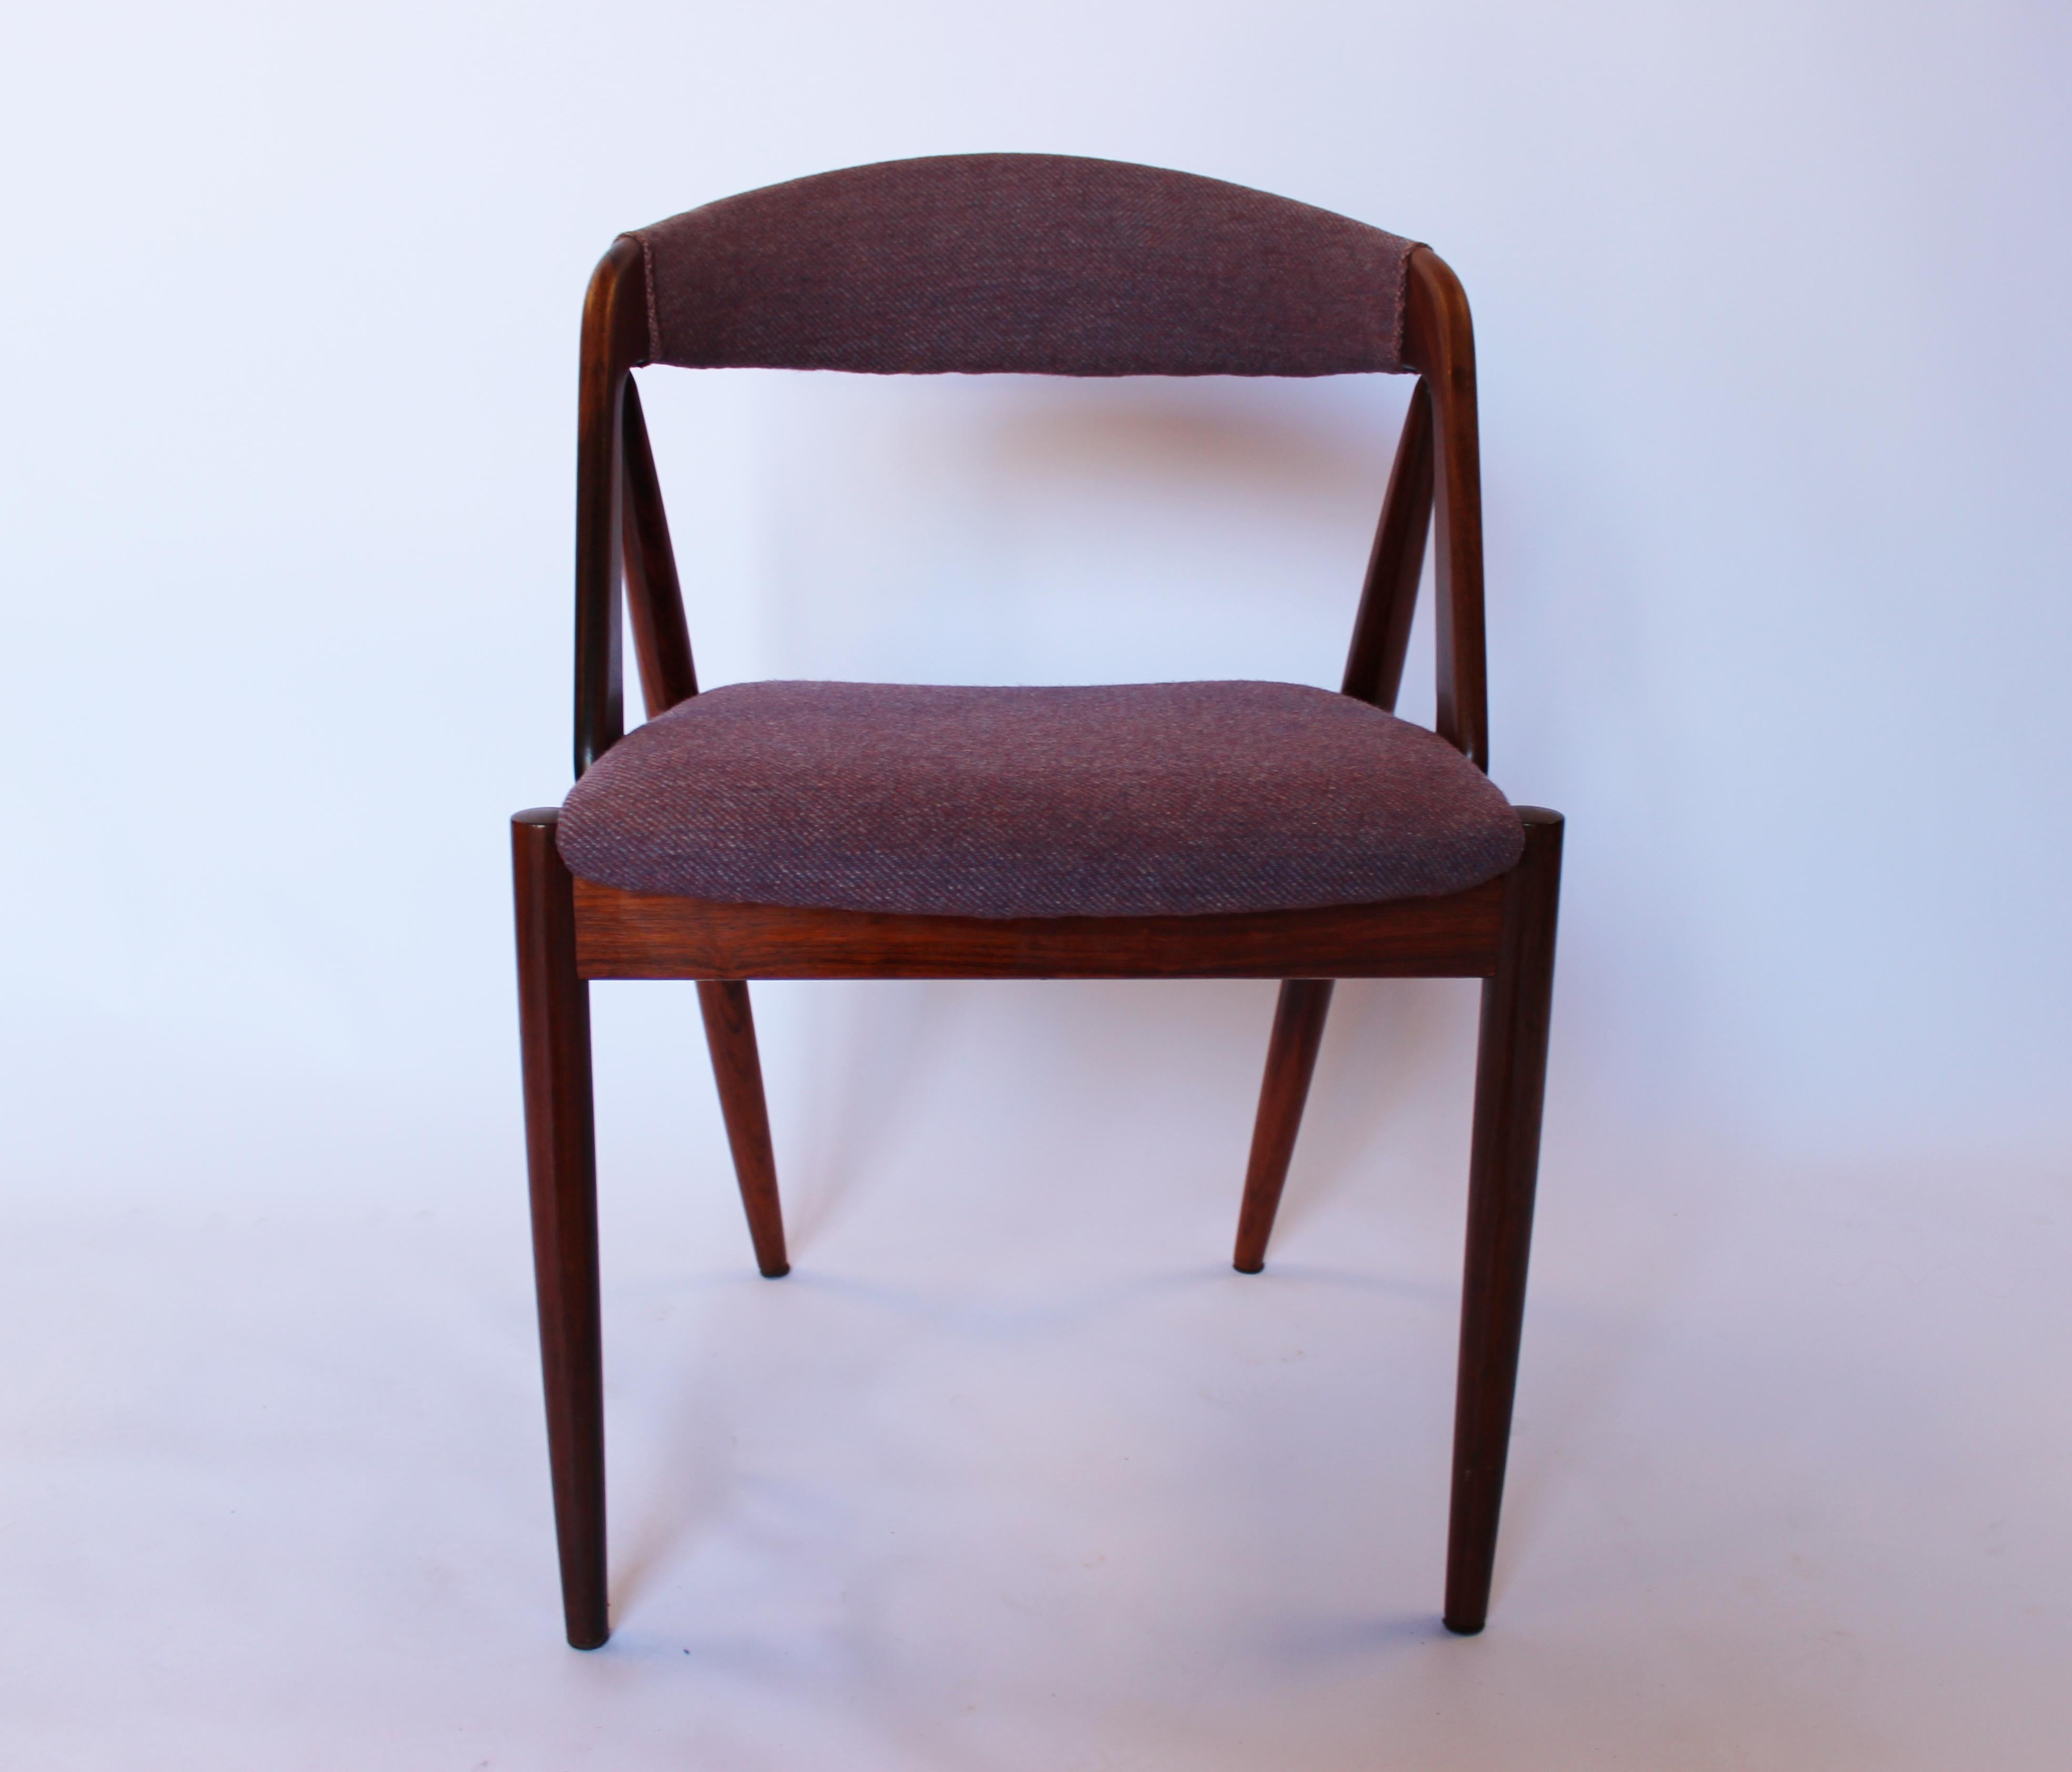 A set of four dining room chairs, model 31, designed by Kai Kristiansen in 1956 and manufactured by Schou Andersen in the 1960s. The chairs are of rosewood and upholstered in purple fabric.